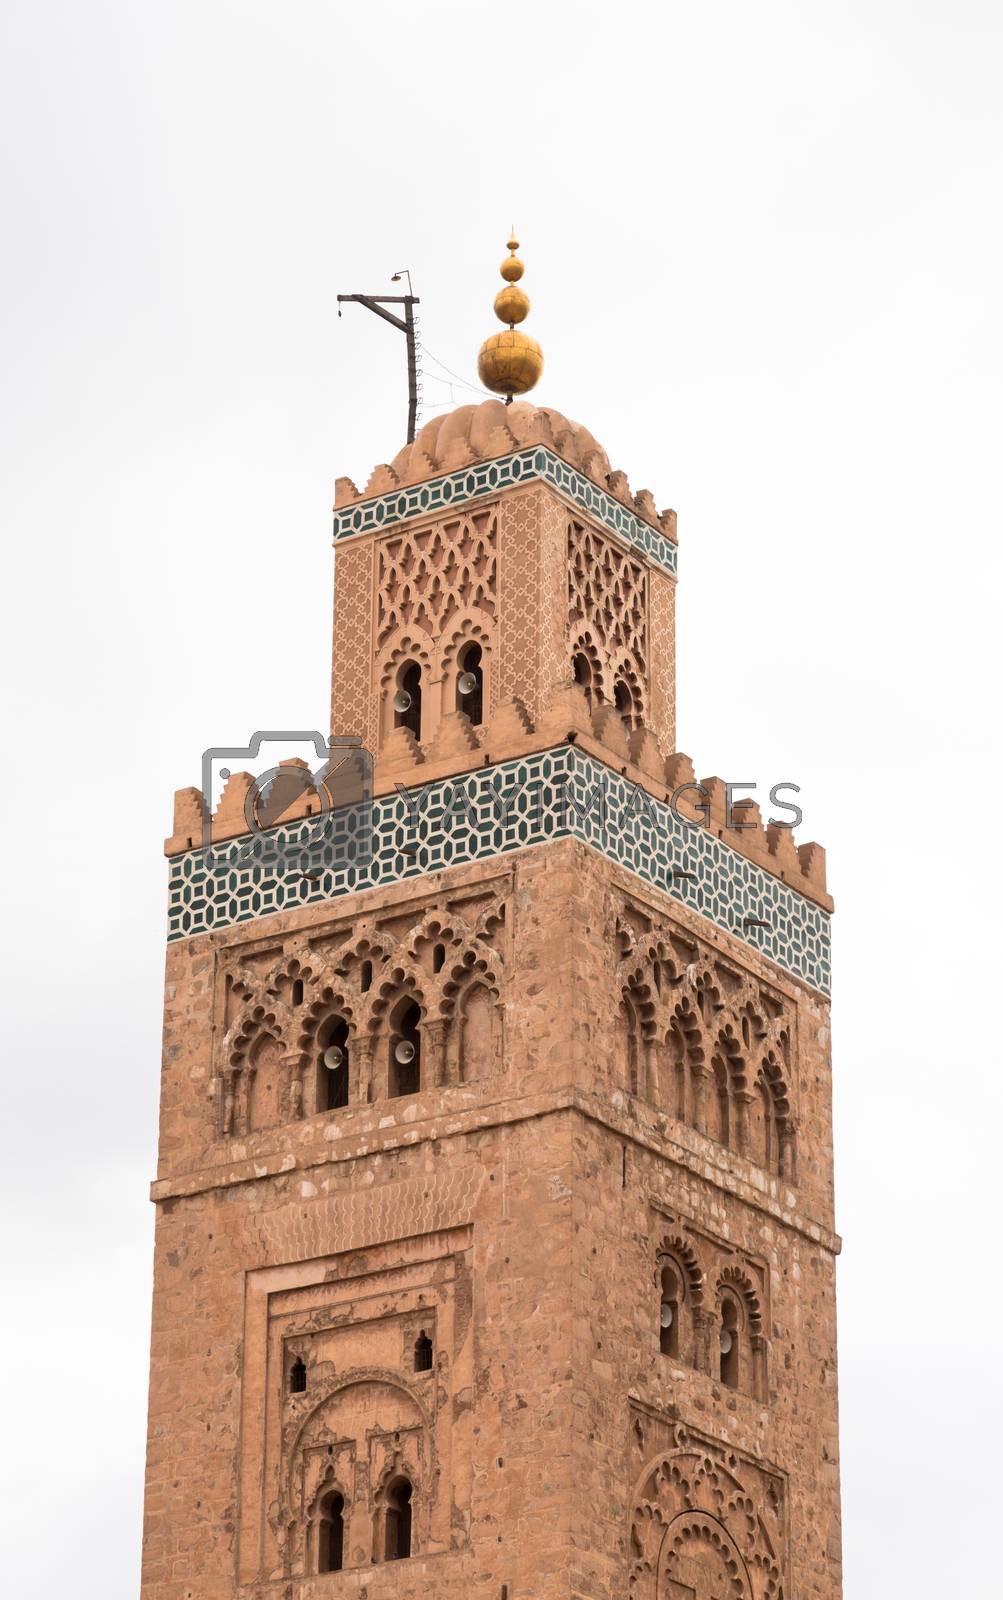 Royalty free image of Koutoubia minaret made from golden bricks in centrum of media, M by epfop